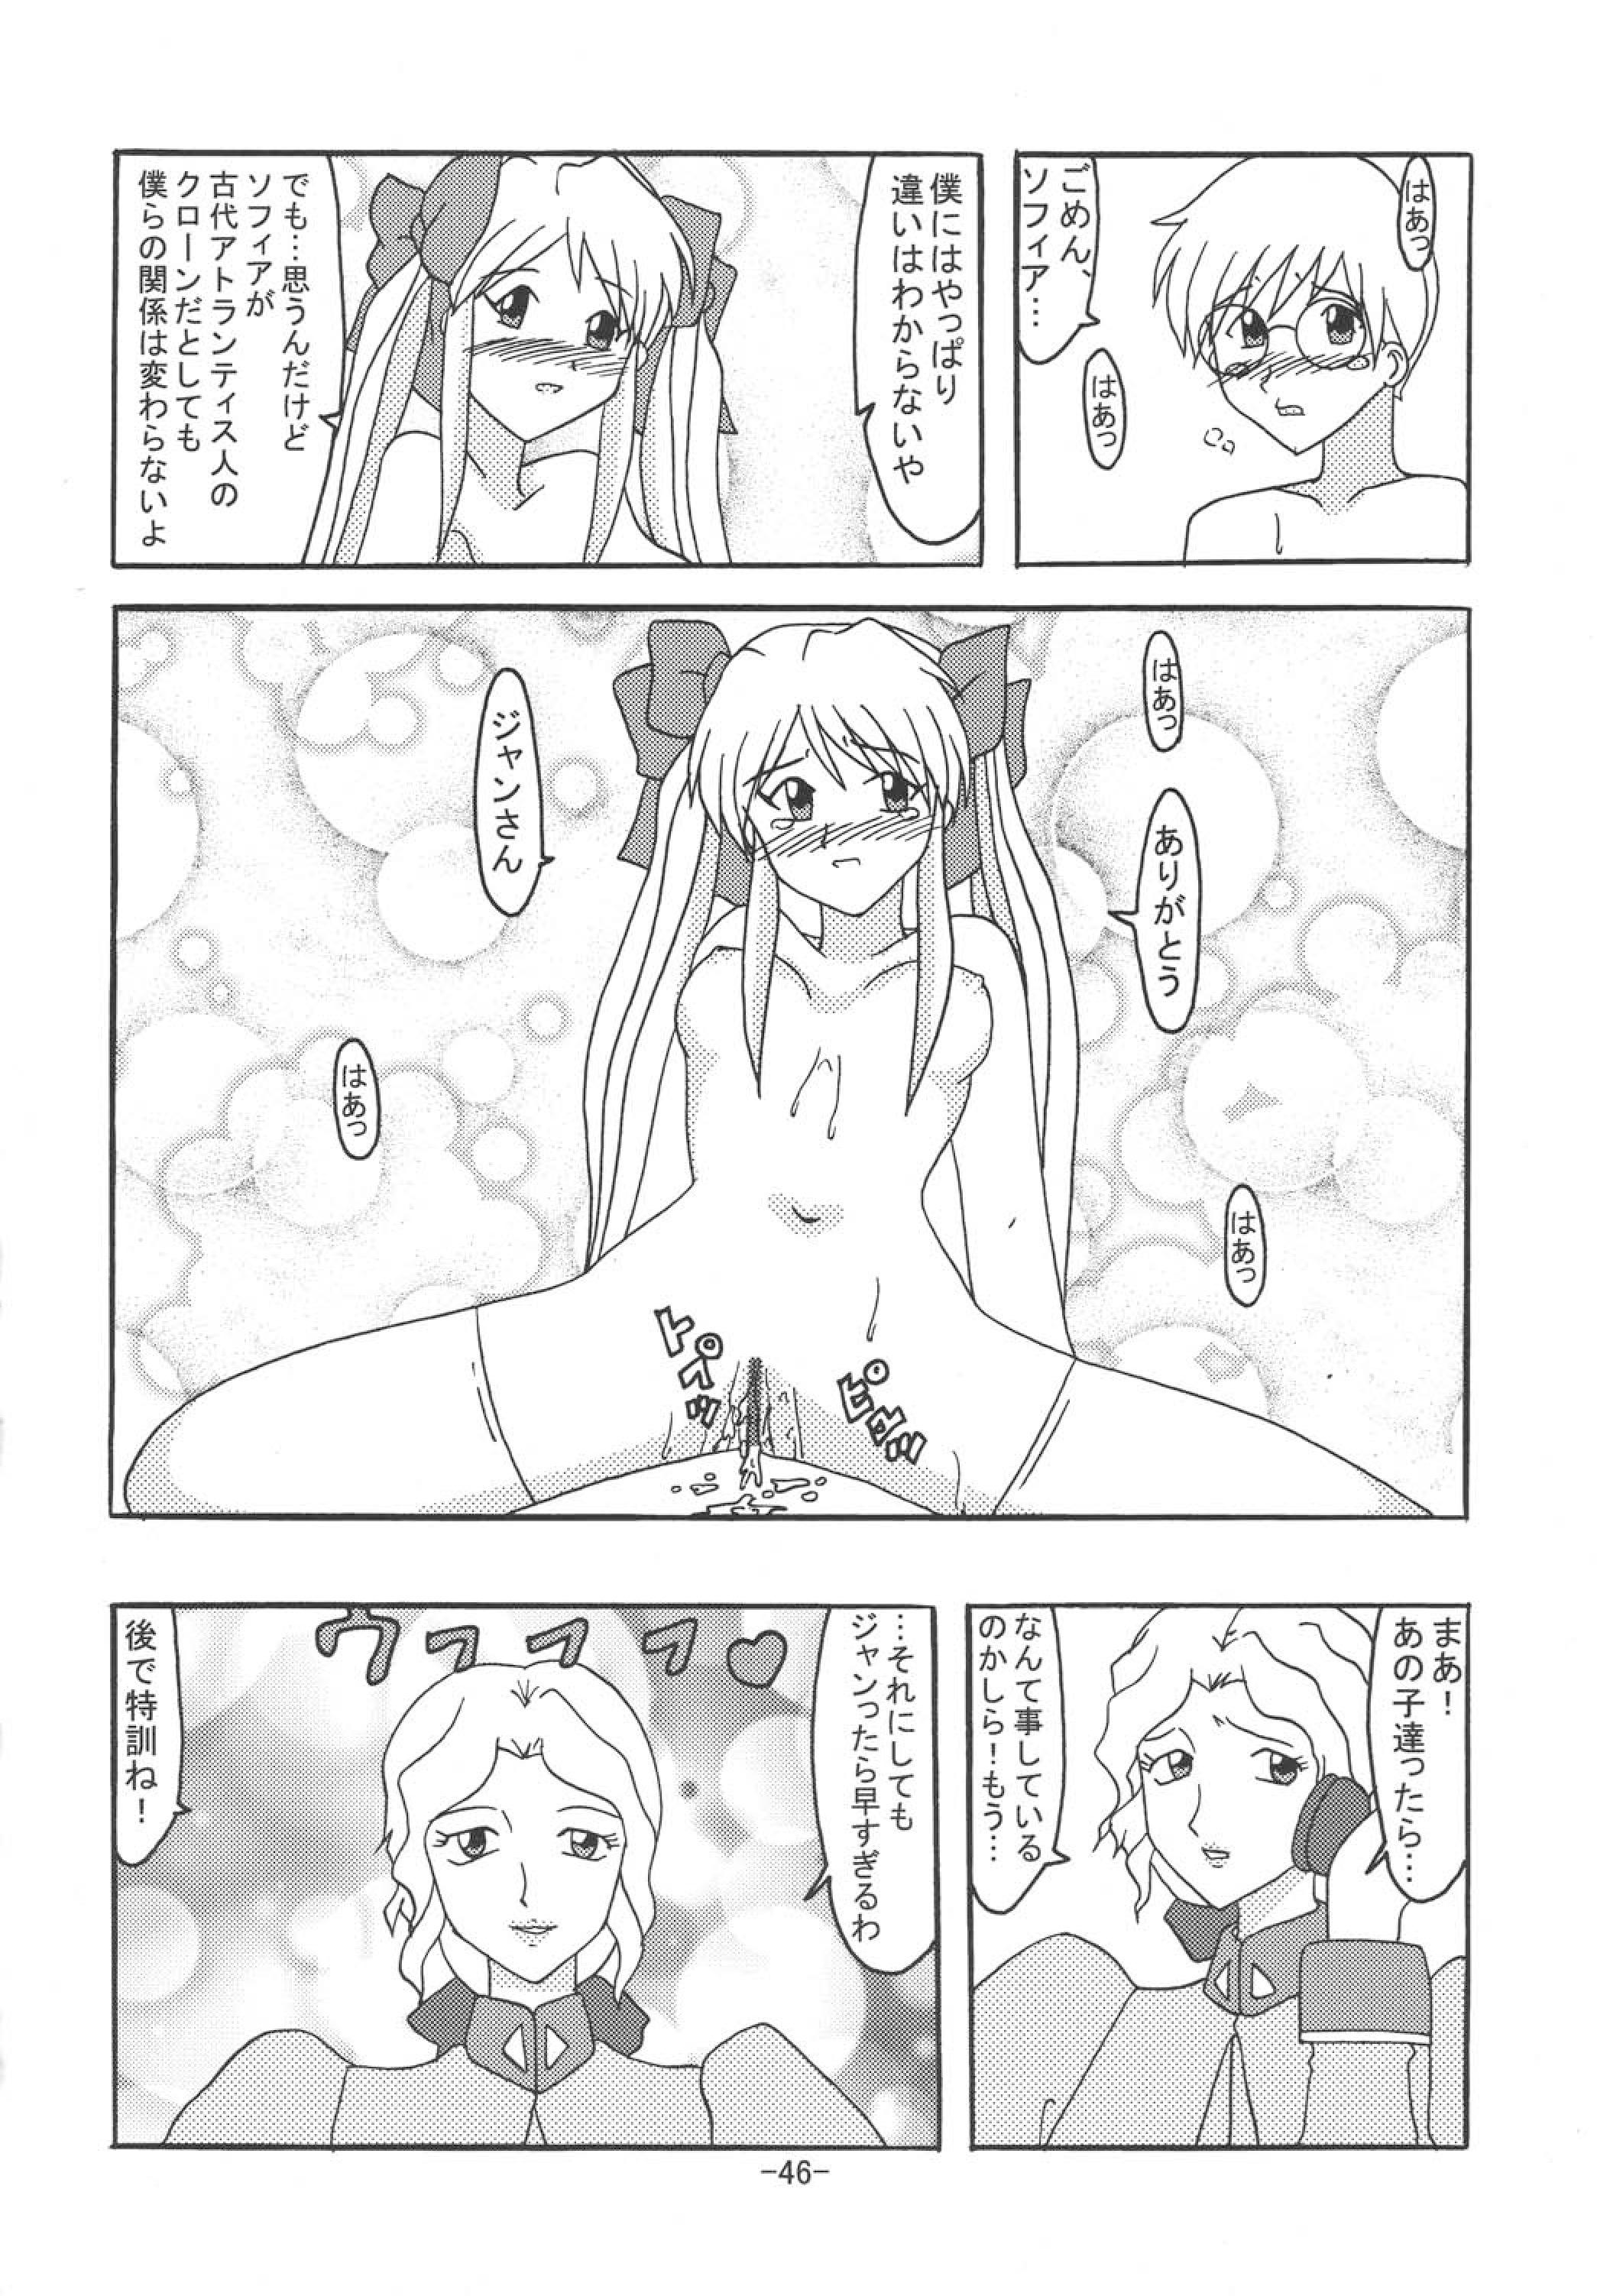 Cock THE LEGEND OF BLUE WATER SIDE 4 - Fushigi no umi no nadia Inherit the bluewater Tribbing - Page 45